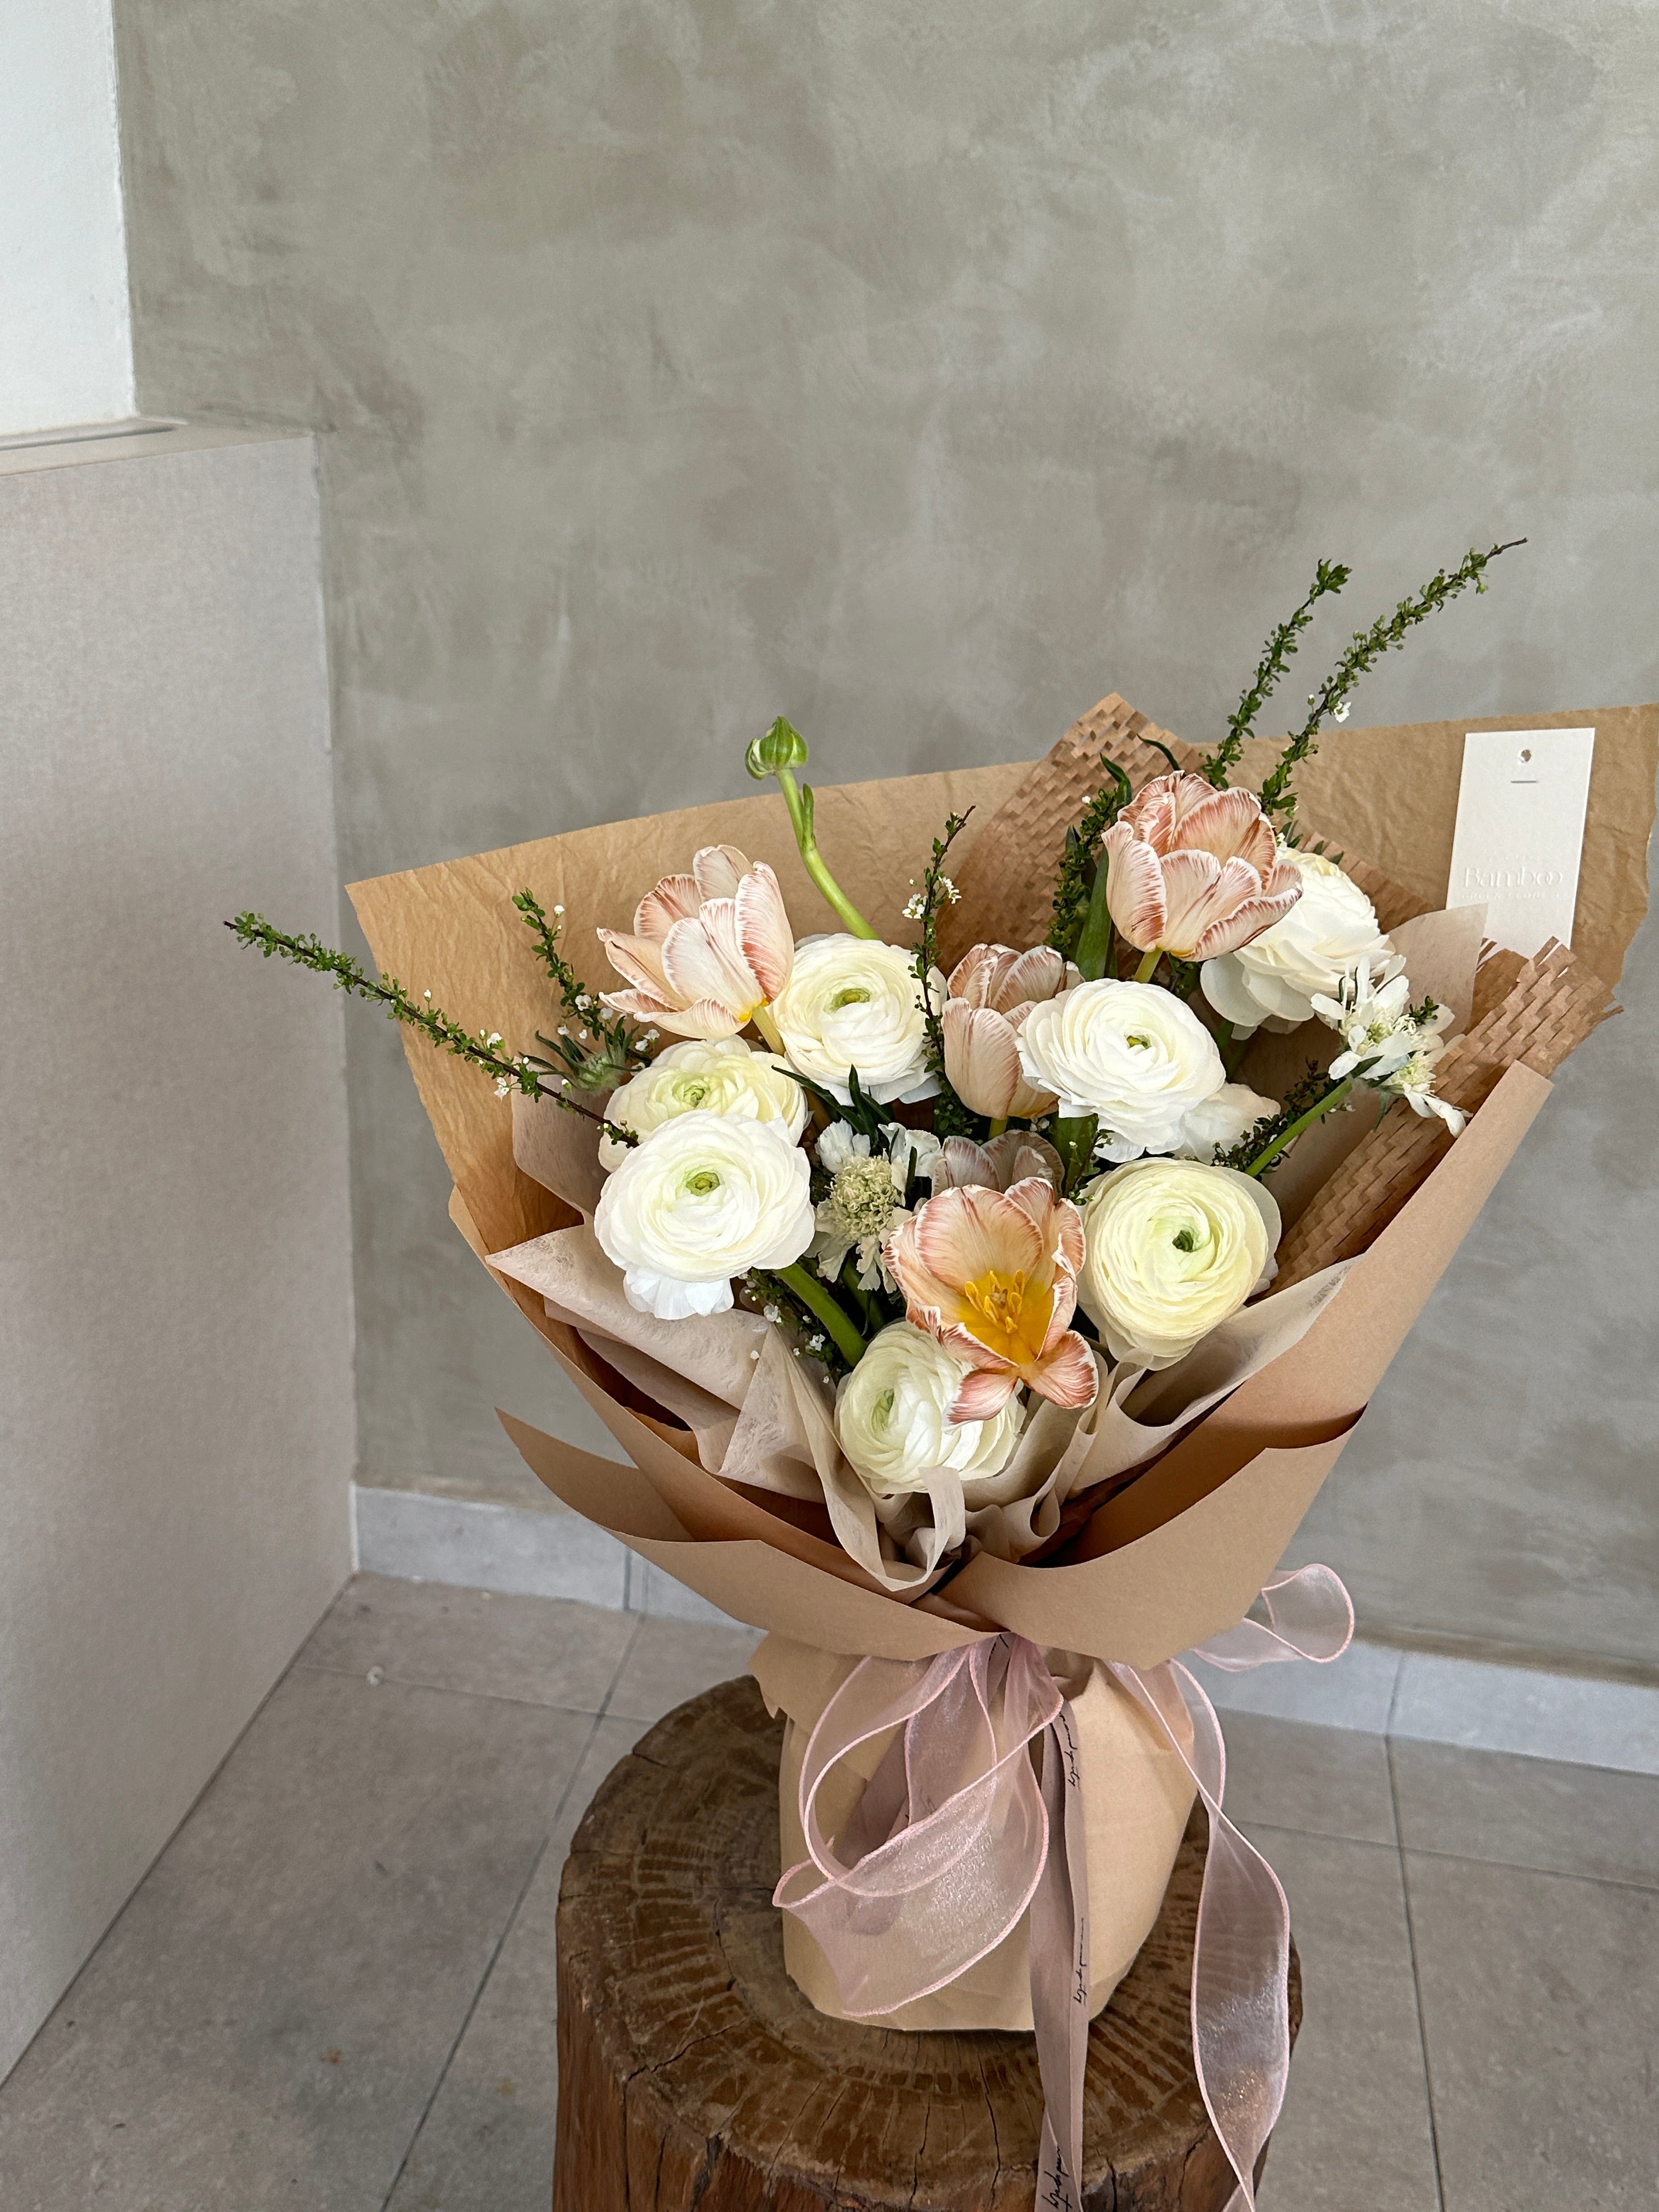 Leave it to us to create an original design with current in season flowers - ranunculus. The ranunculus blooms in the early spring and will continue to do so until the beginning of summer 